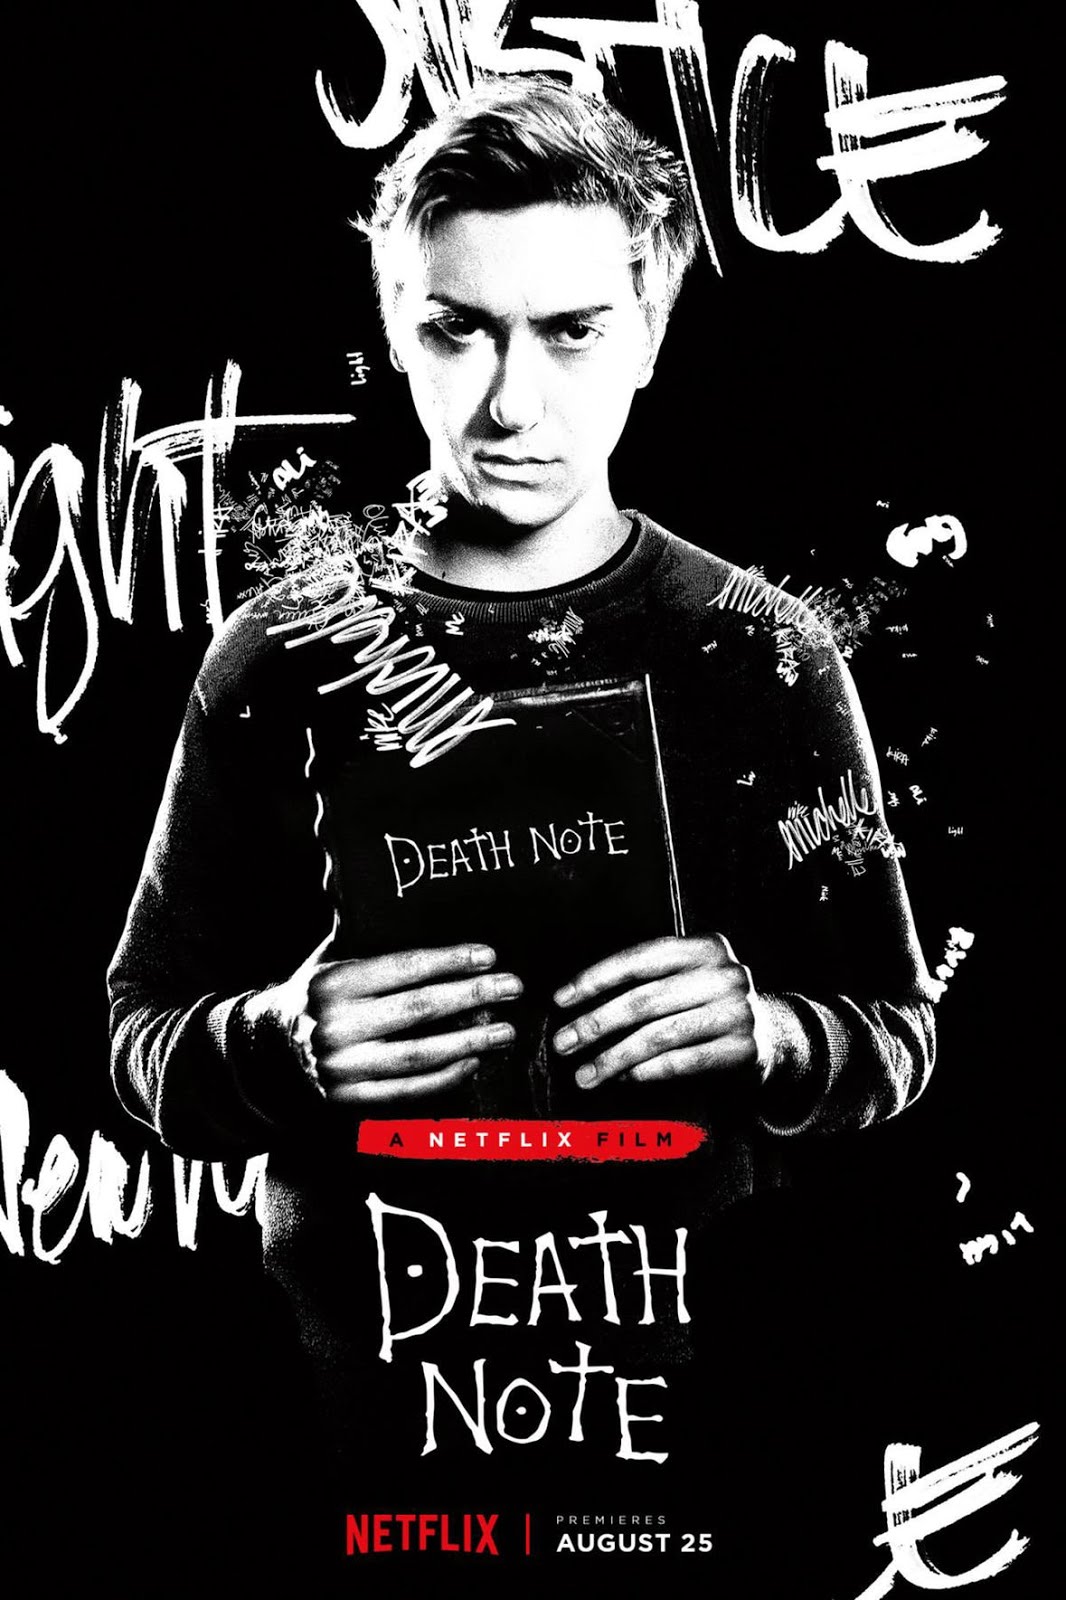 Download Death Note 2017 Full Hd Quality